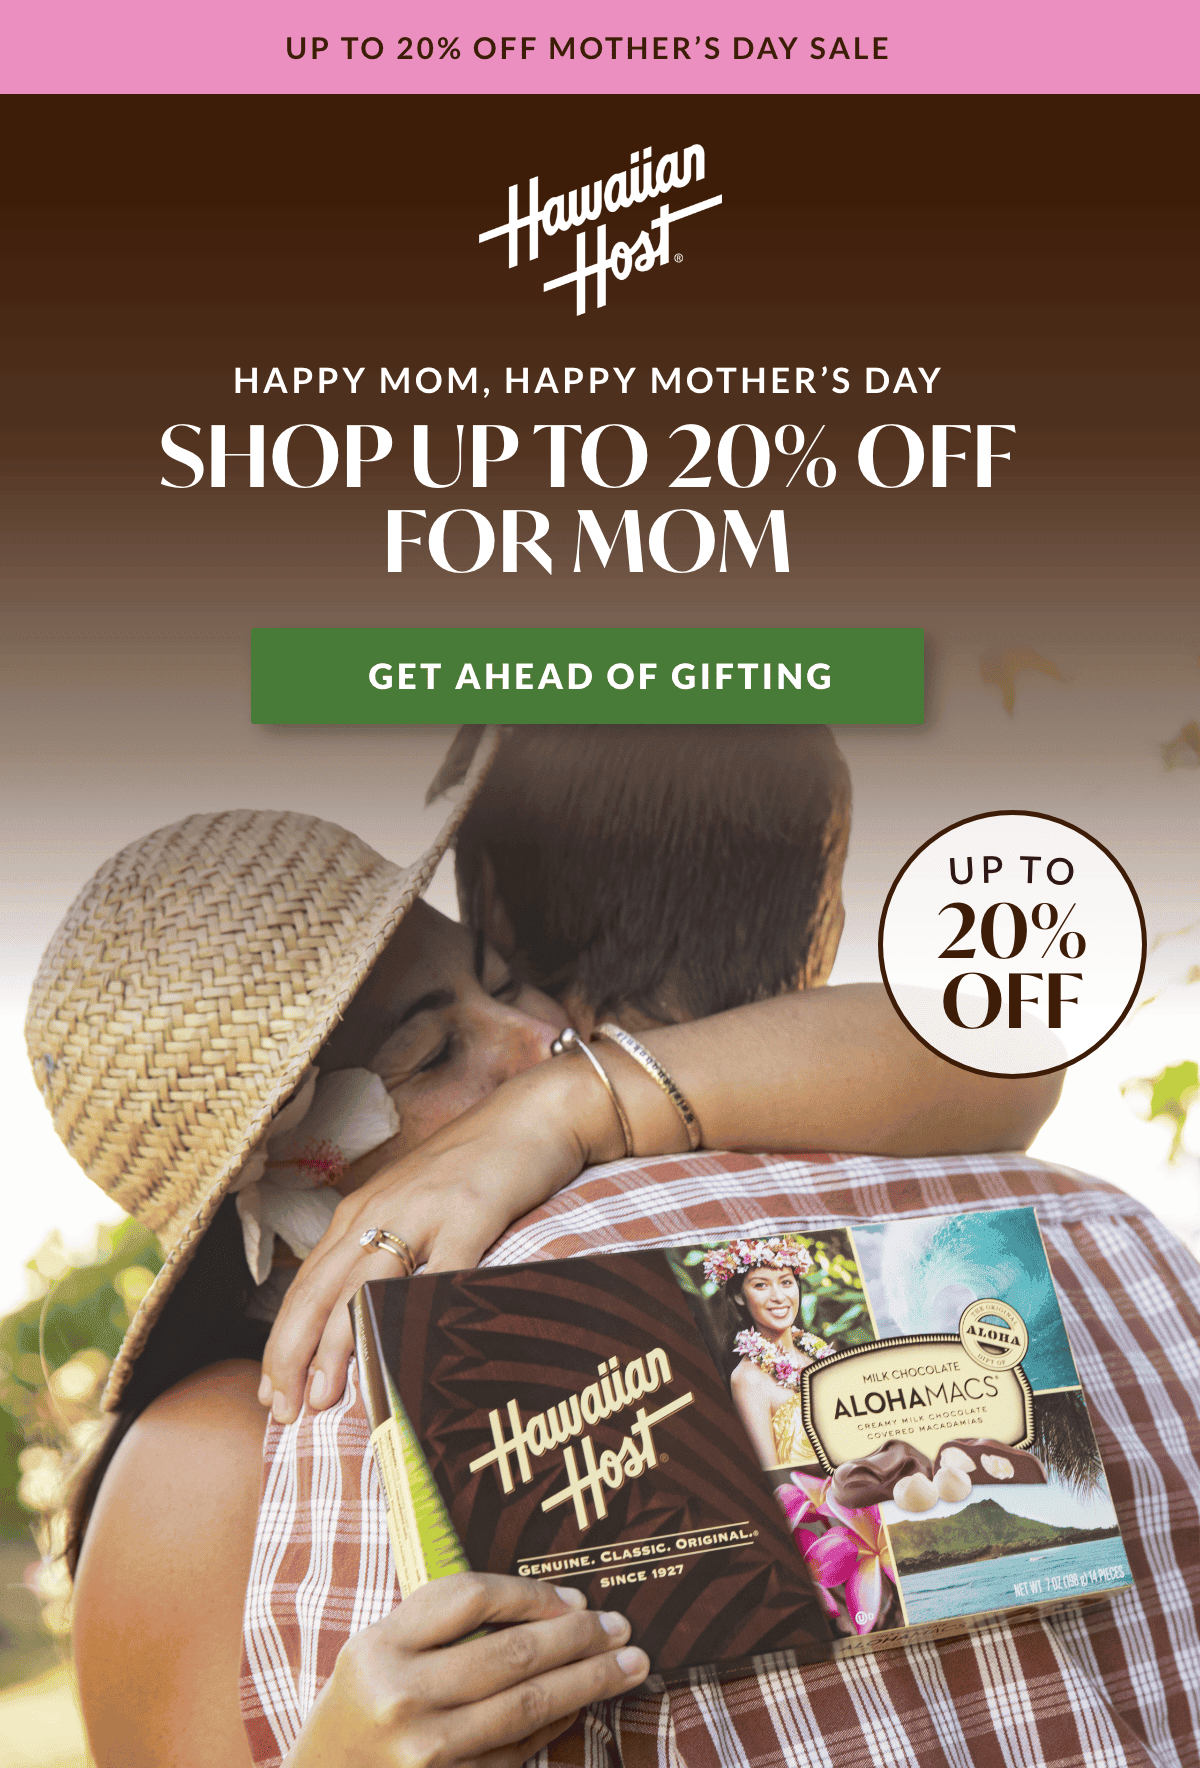 Shop up to 20% OFF for Mother's Day